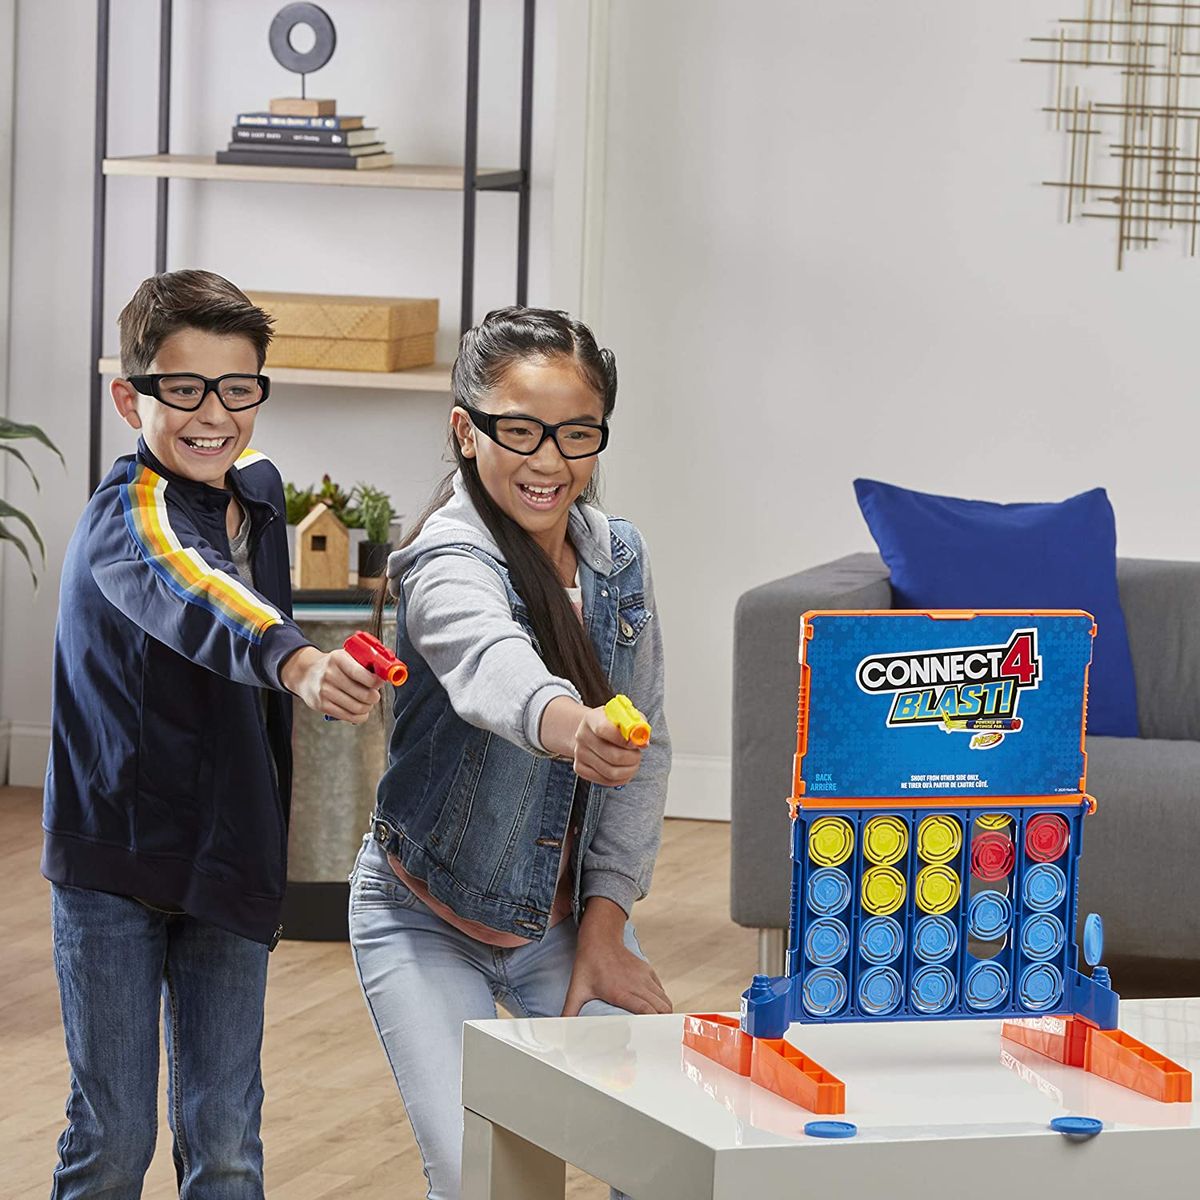 Top 10 Nerf game ideas for an action-packed summer of fun | Gardeningetc